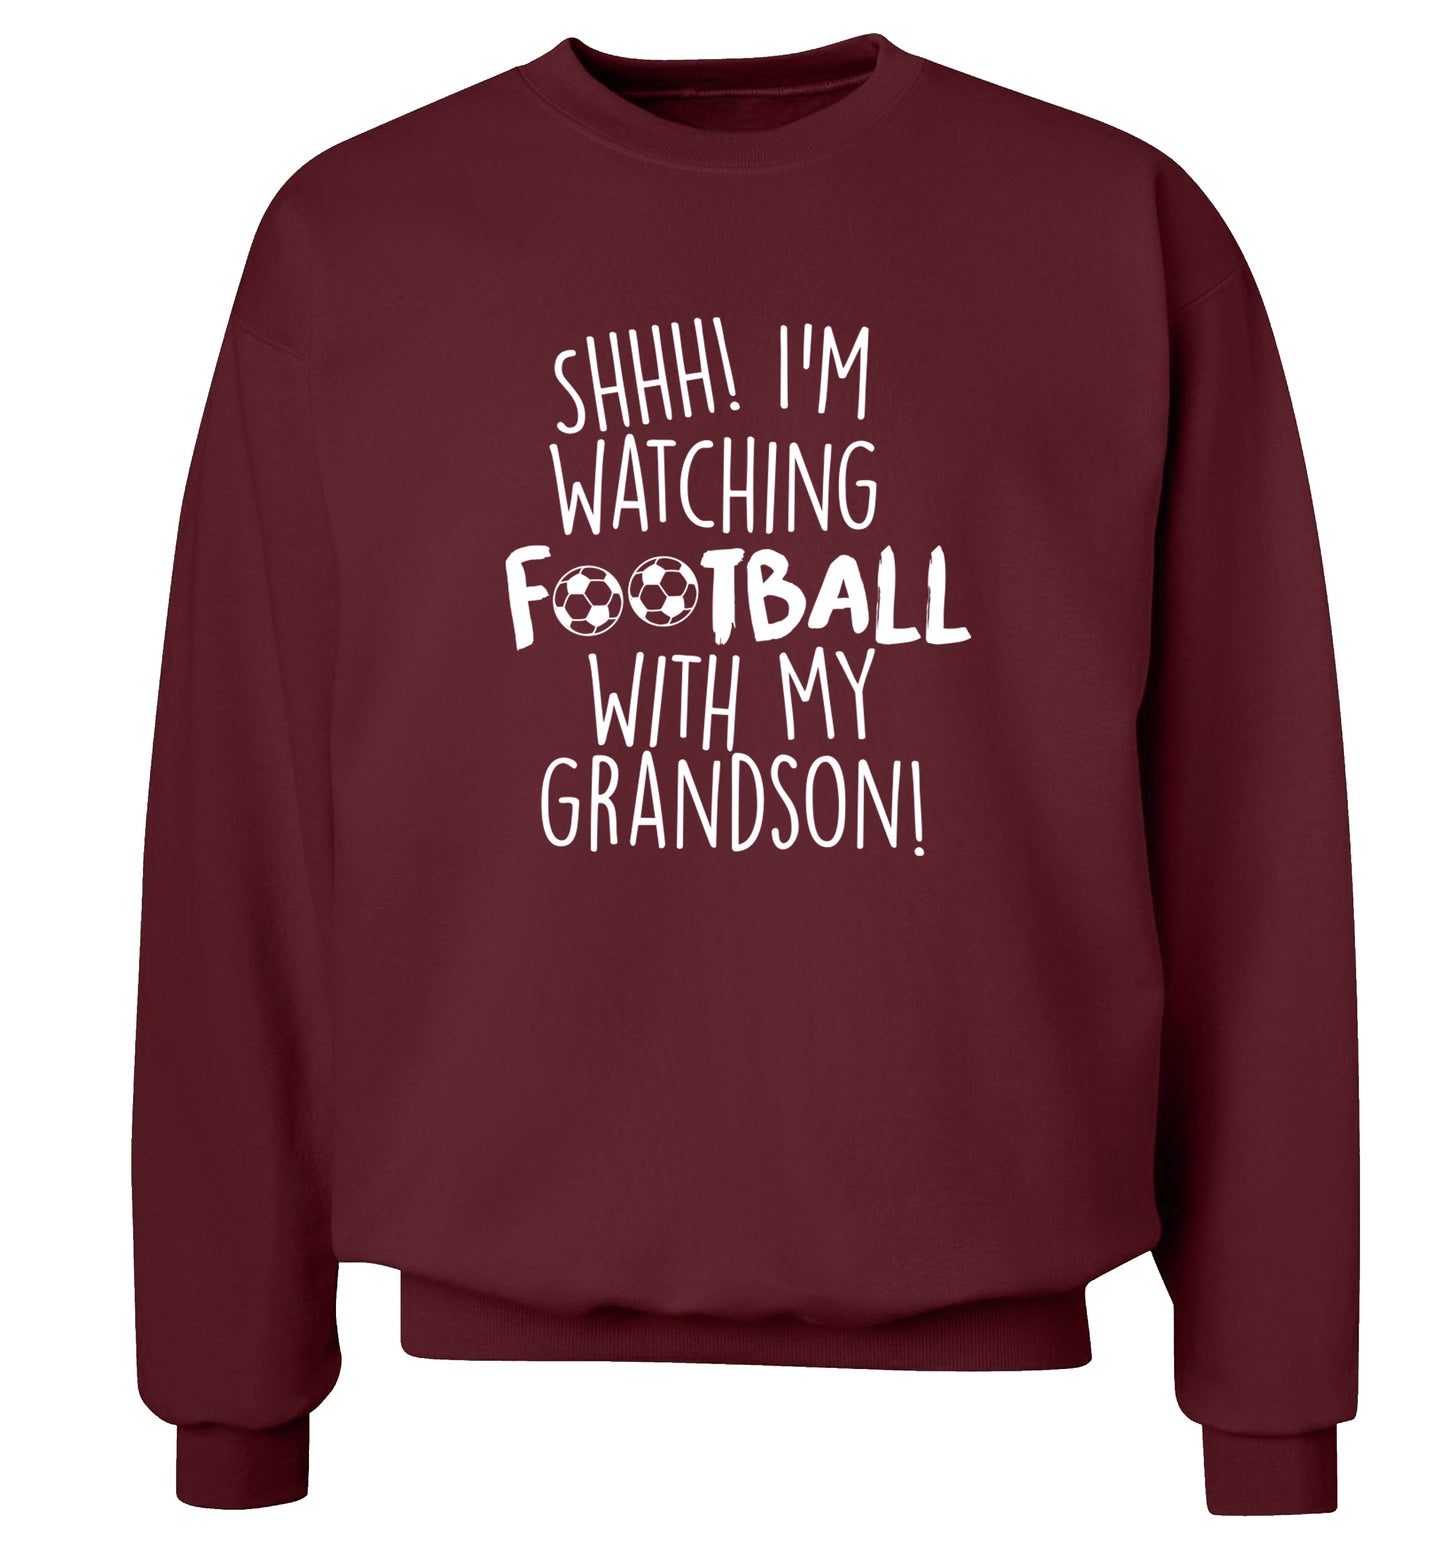 Shhh I'm watching football with my grandson Adult's unisexmaroon Sweater 2XL